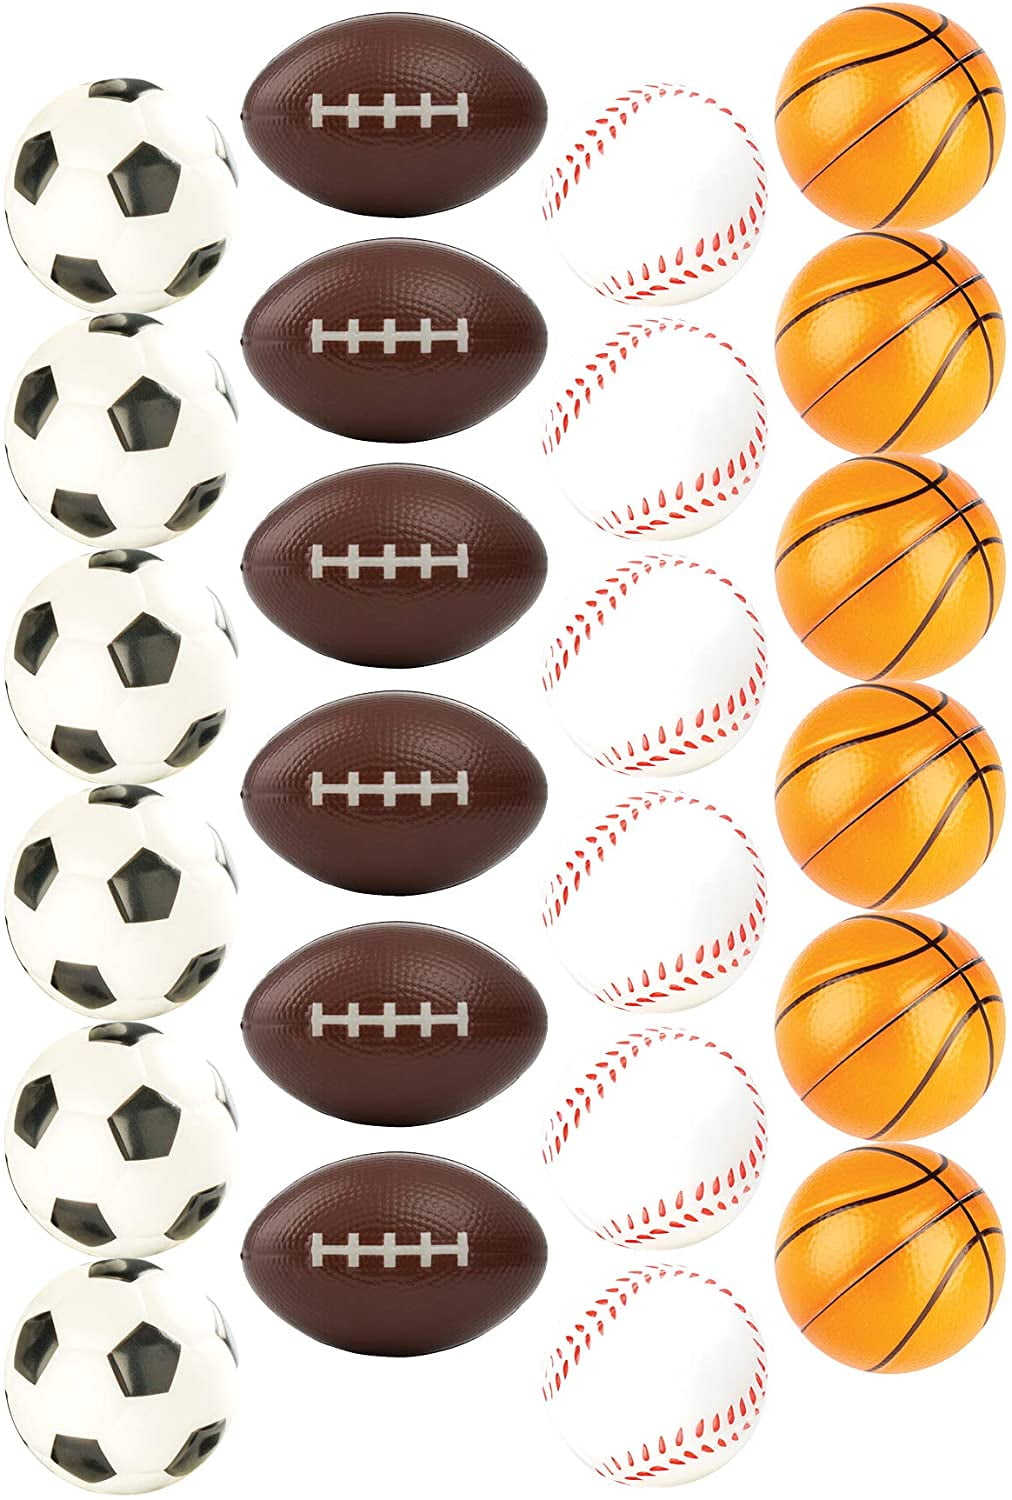 Peeks Box of 12 Soft Footballs Kids Football Party Bag Toy Ball Favour Prizes 